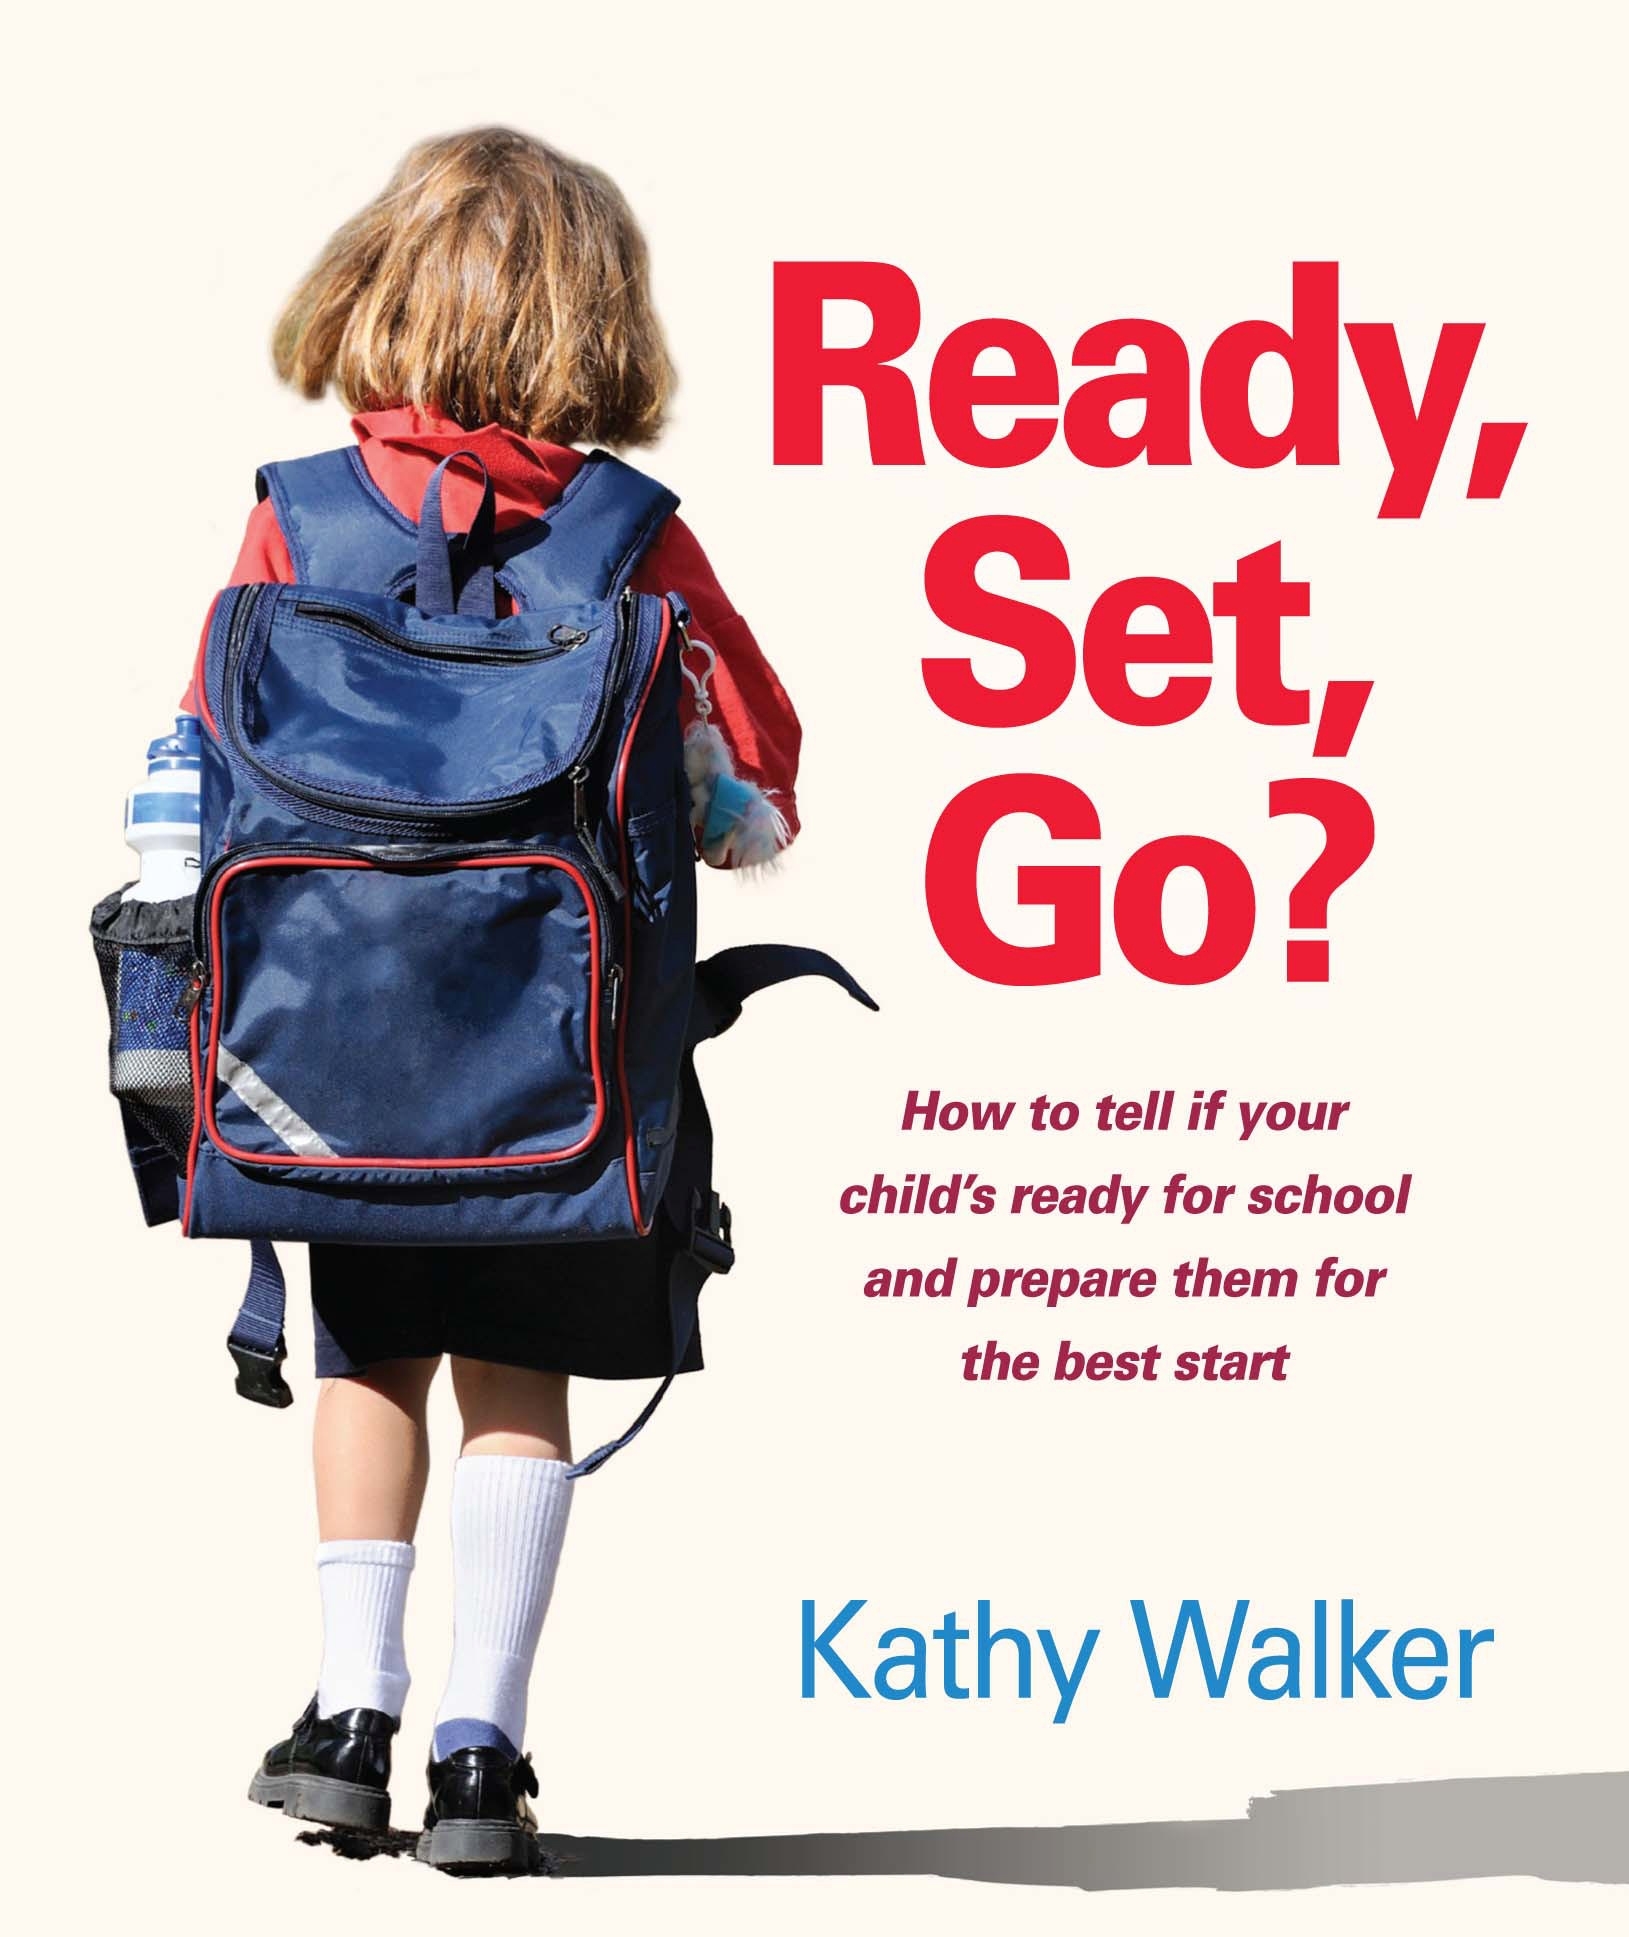 Ready, Set, Read!: BOOK REVIEW